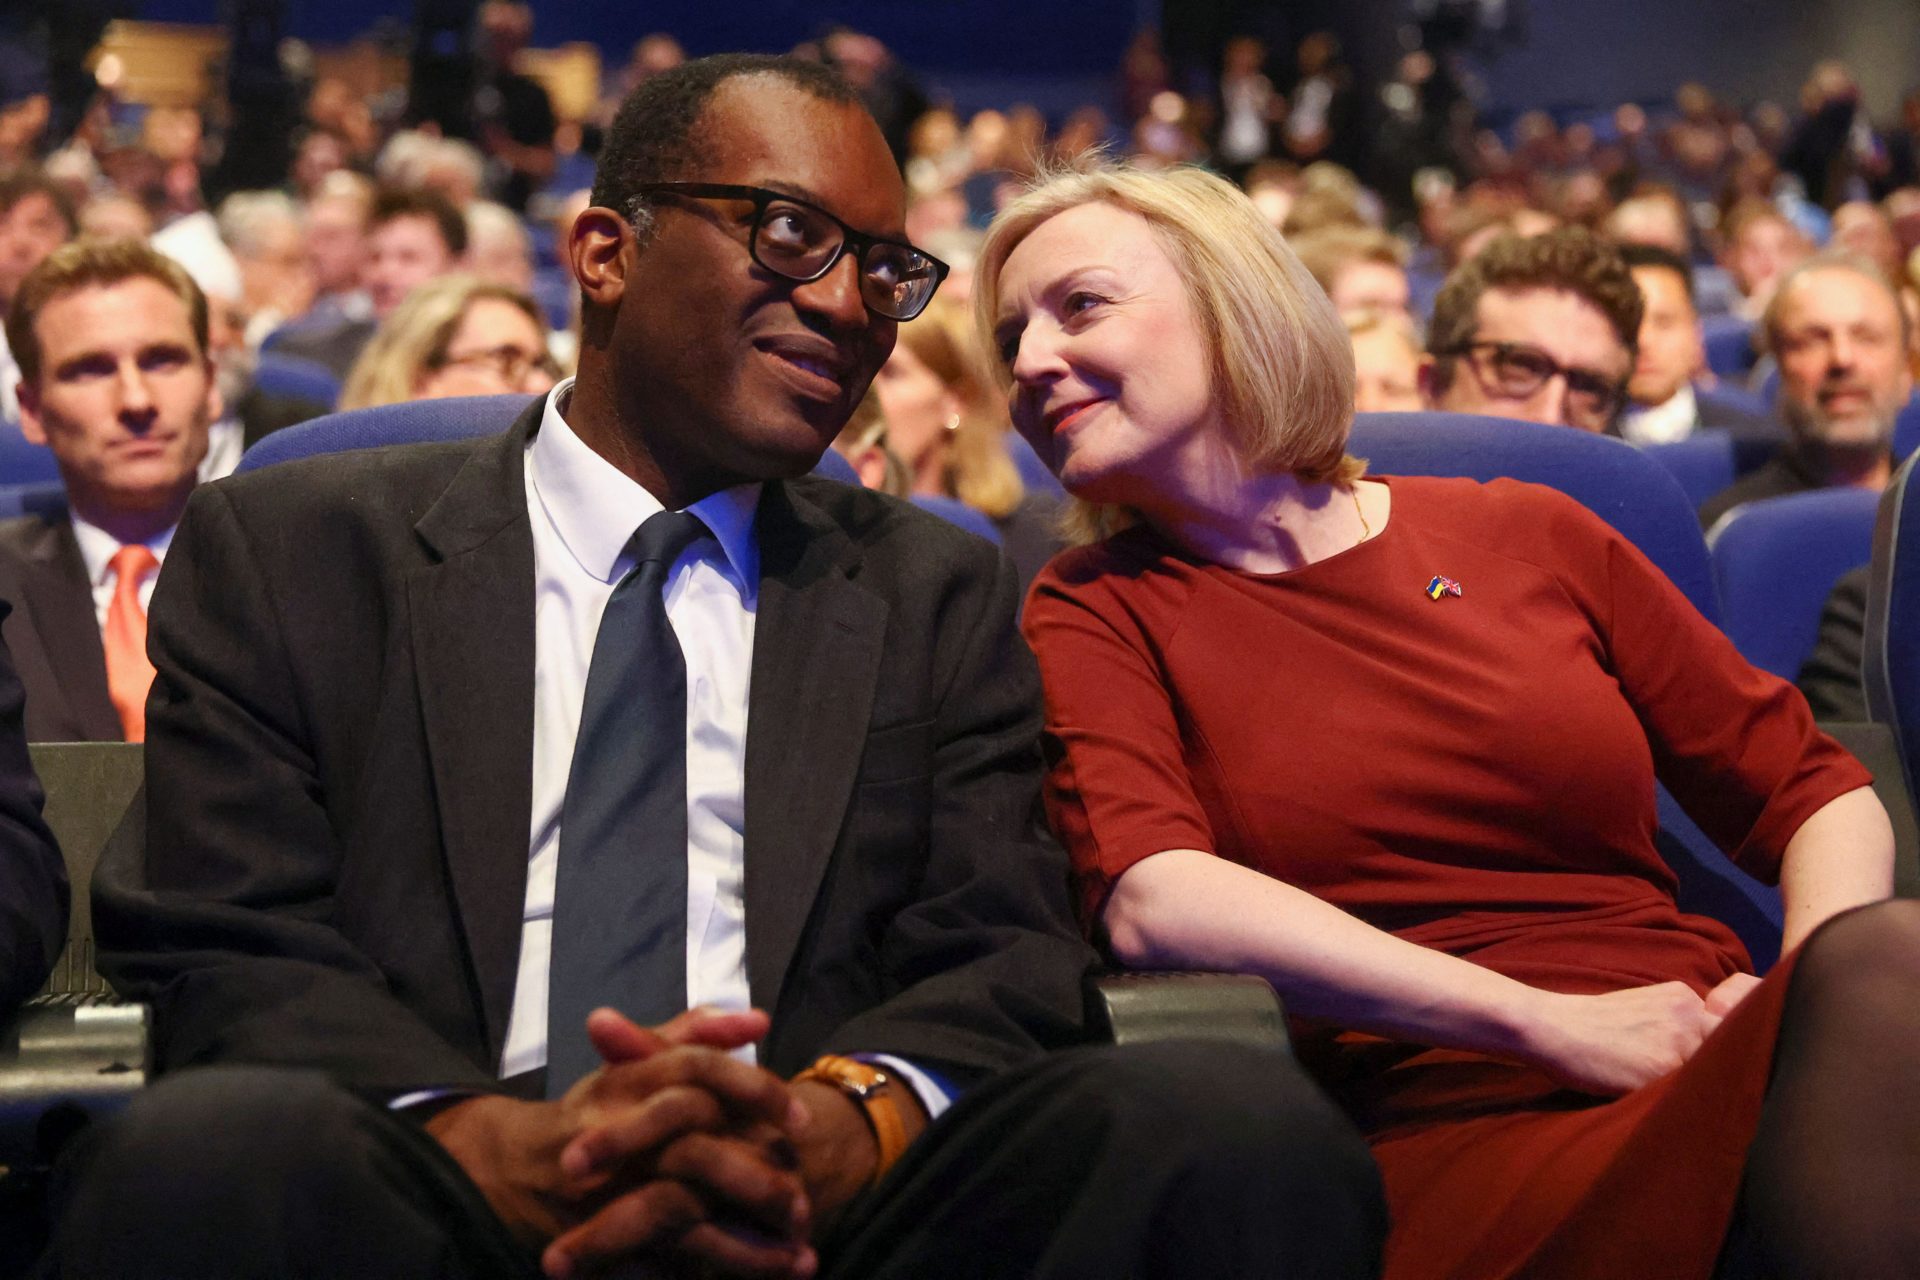 British Prime Minister Liz Truss and Chancellor of the Exchequer Kwasi Kwarteng attend the annual Conservative Party conference in Birmingham.